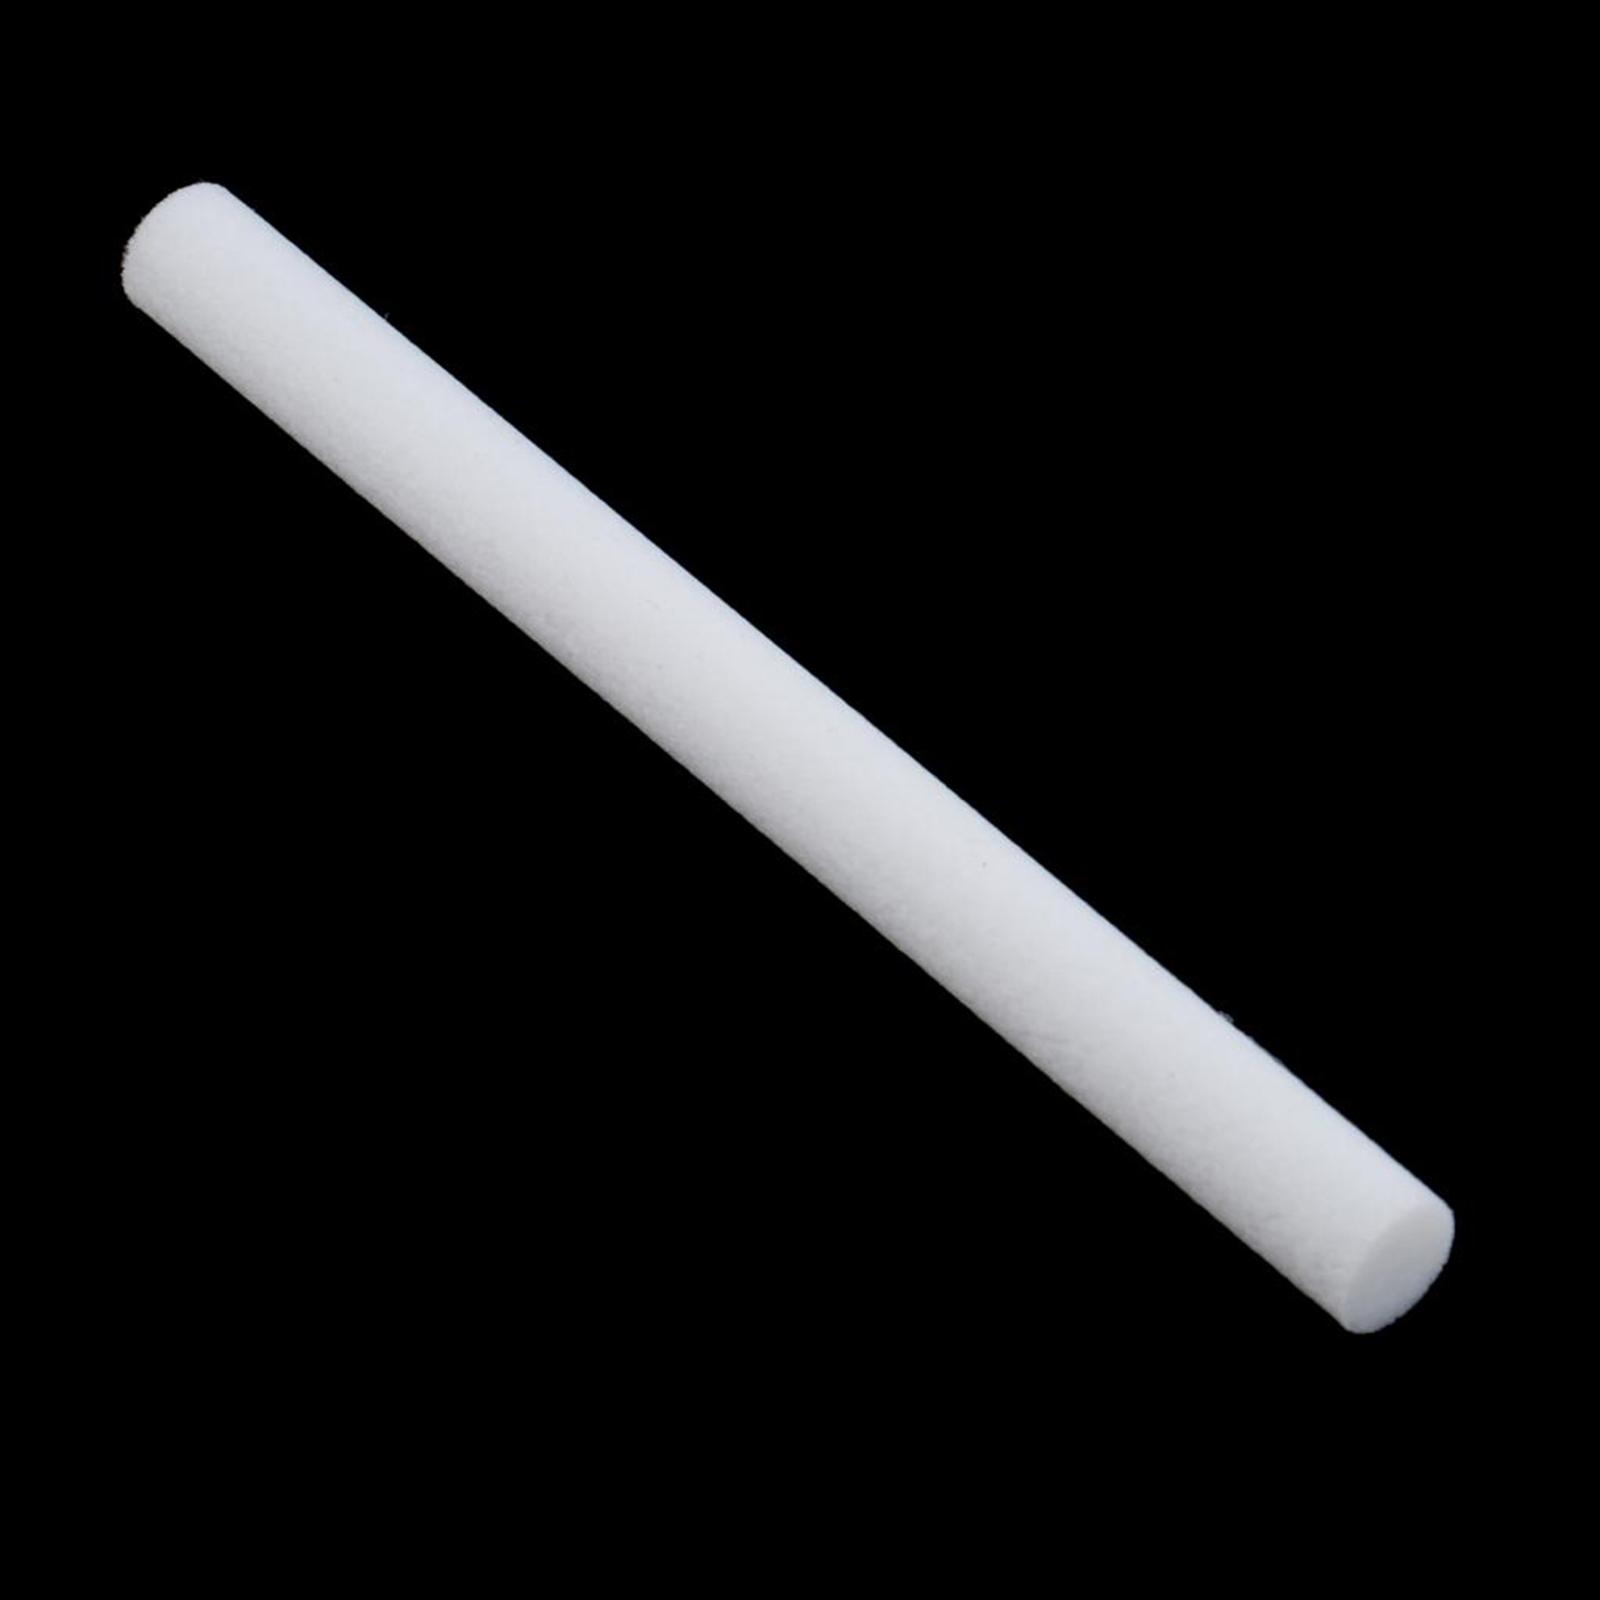 Cotton Sponge Filter Stick Refills for Air Humidifier Aroma Diffuser